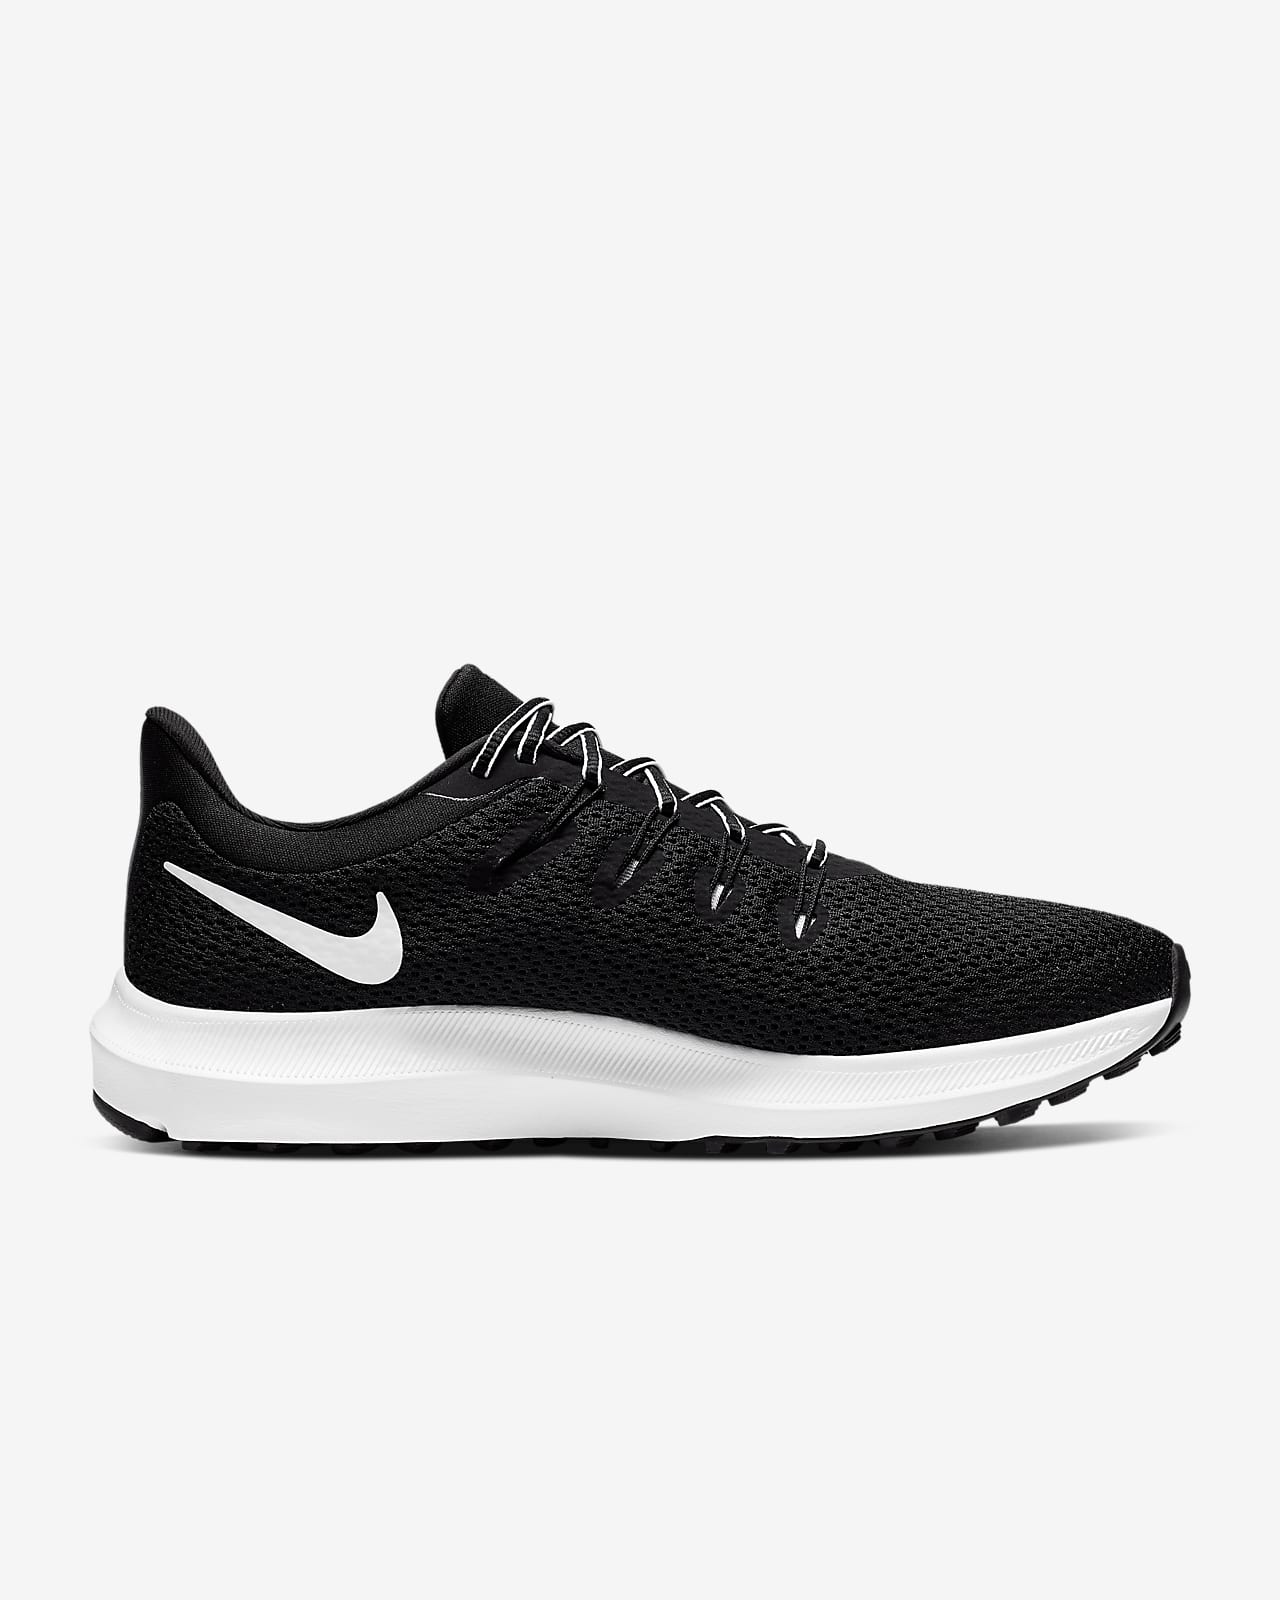 219 nike running shoe releases